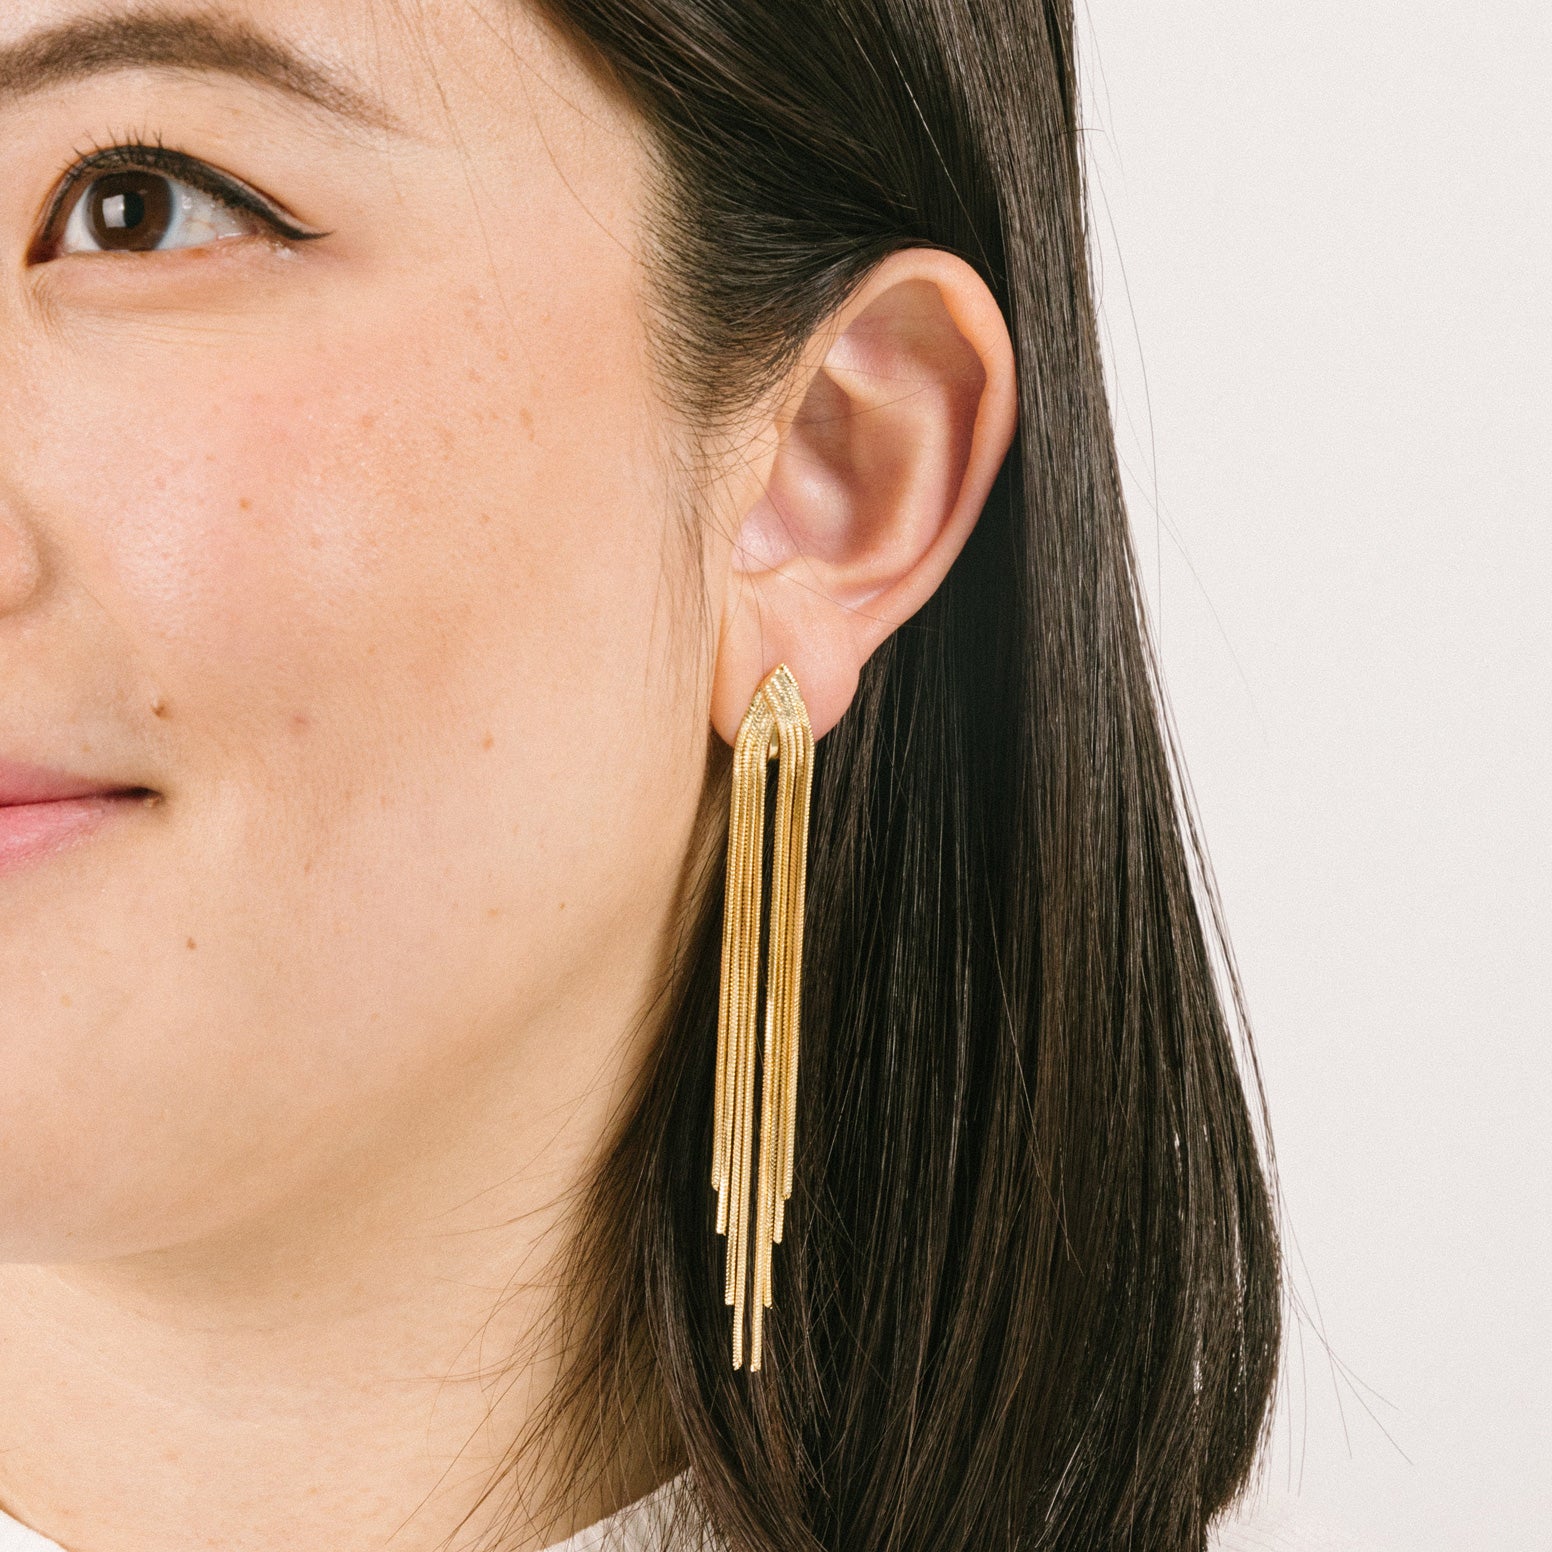 A model wearing the Chain Chandelier Clip On Earrings in Gold embody a removable rubber padding for secure yet comfortable holding of all ear types, with up to 12 hours of wear. This single pair, fashioned from gold tone copper alloy, offers an immediate air of refinement and distinction.